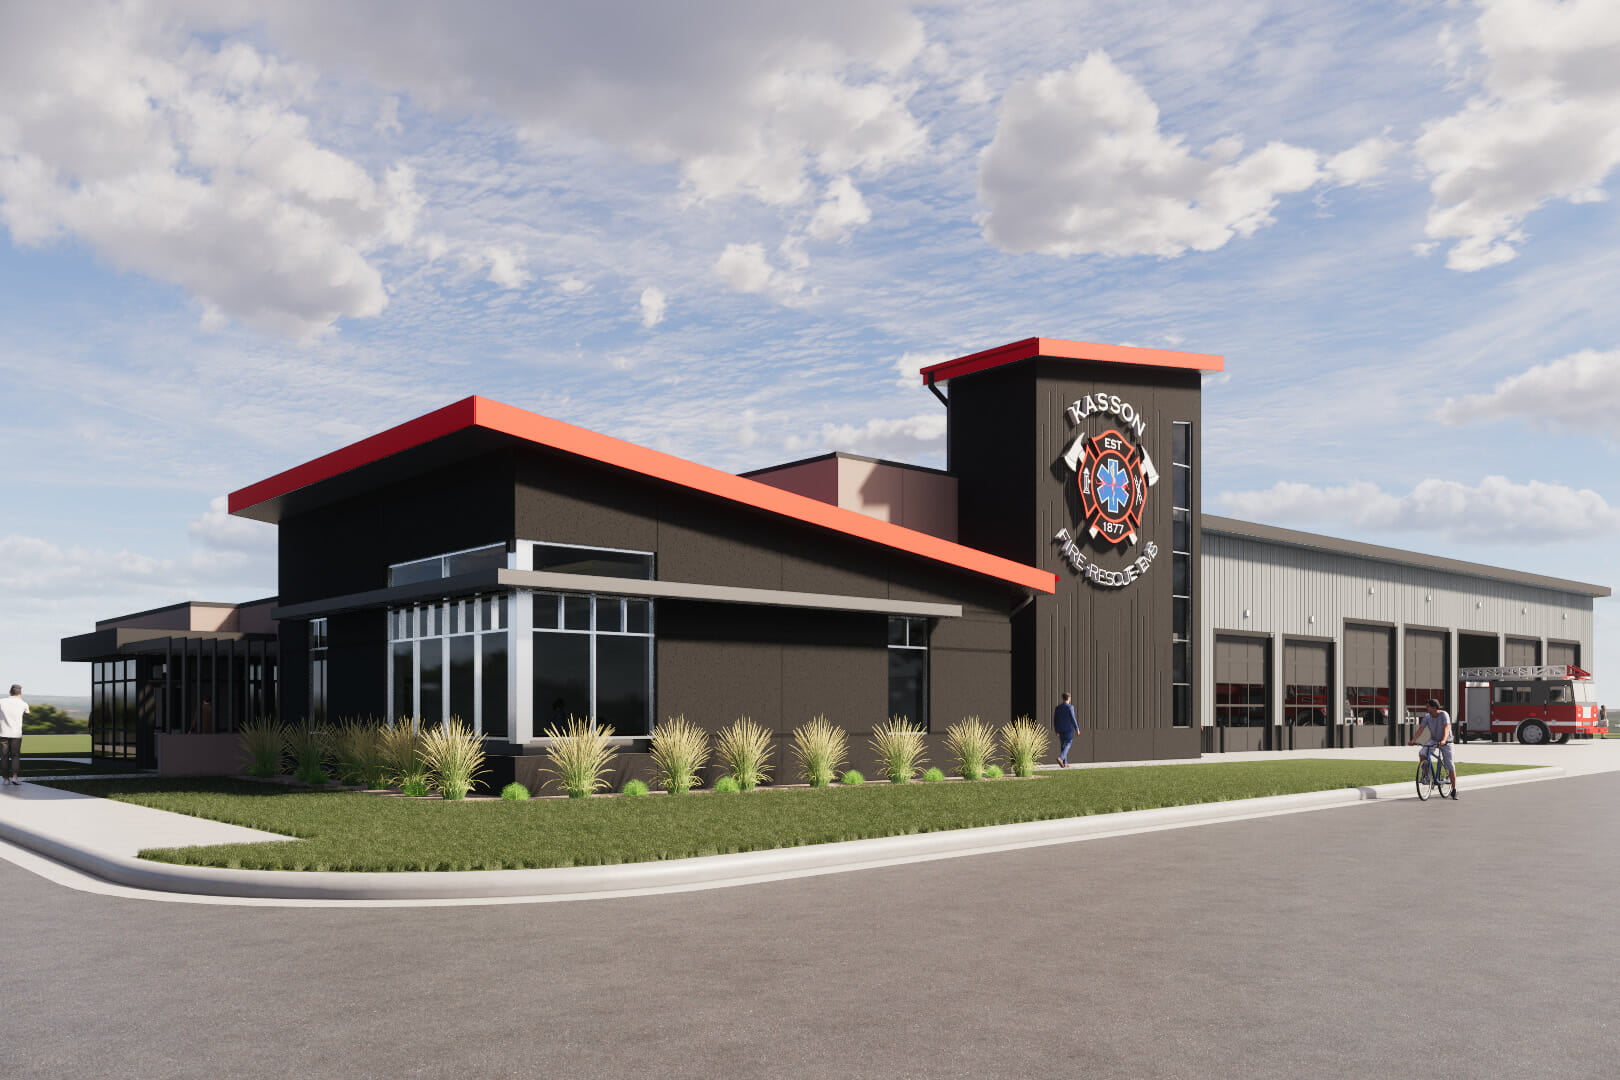 Learn about the City of Kasson's new $7 million fire station that will also have a police station to the north and utilizing the second level for a new city hall.